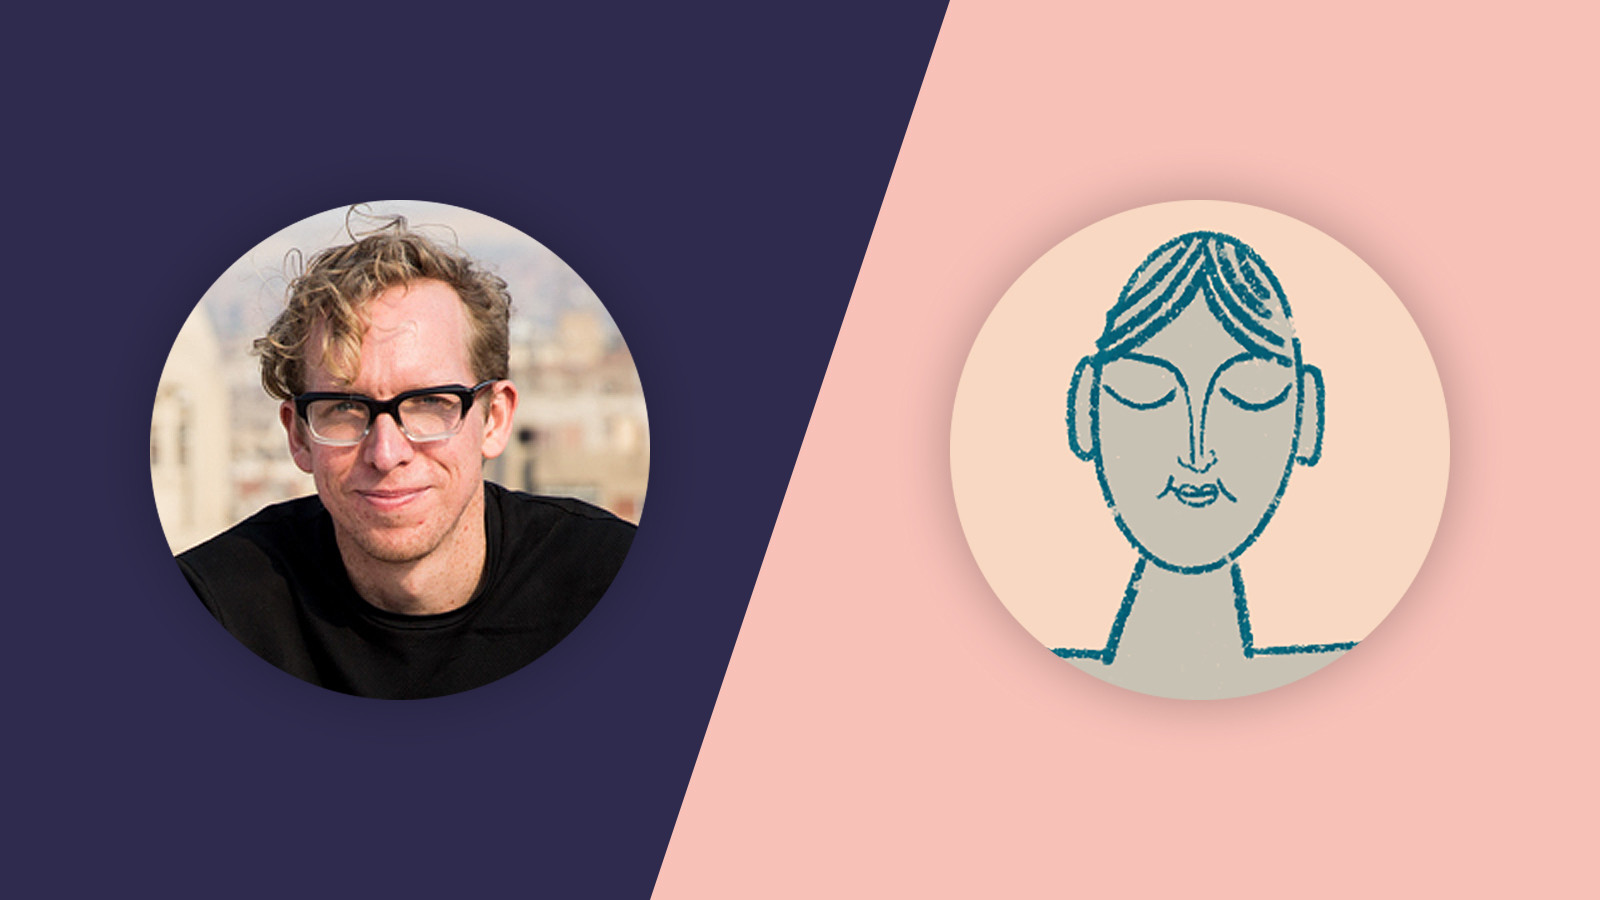 A rectangle half Navy blue (left) and half pink (right). On the left hand side is a photo of Andy Field and on the right is an illustration of a face.